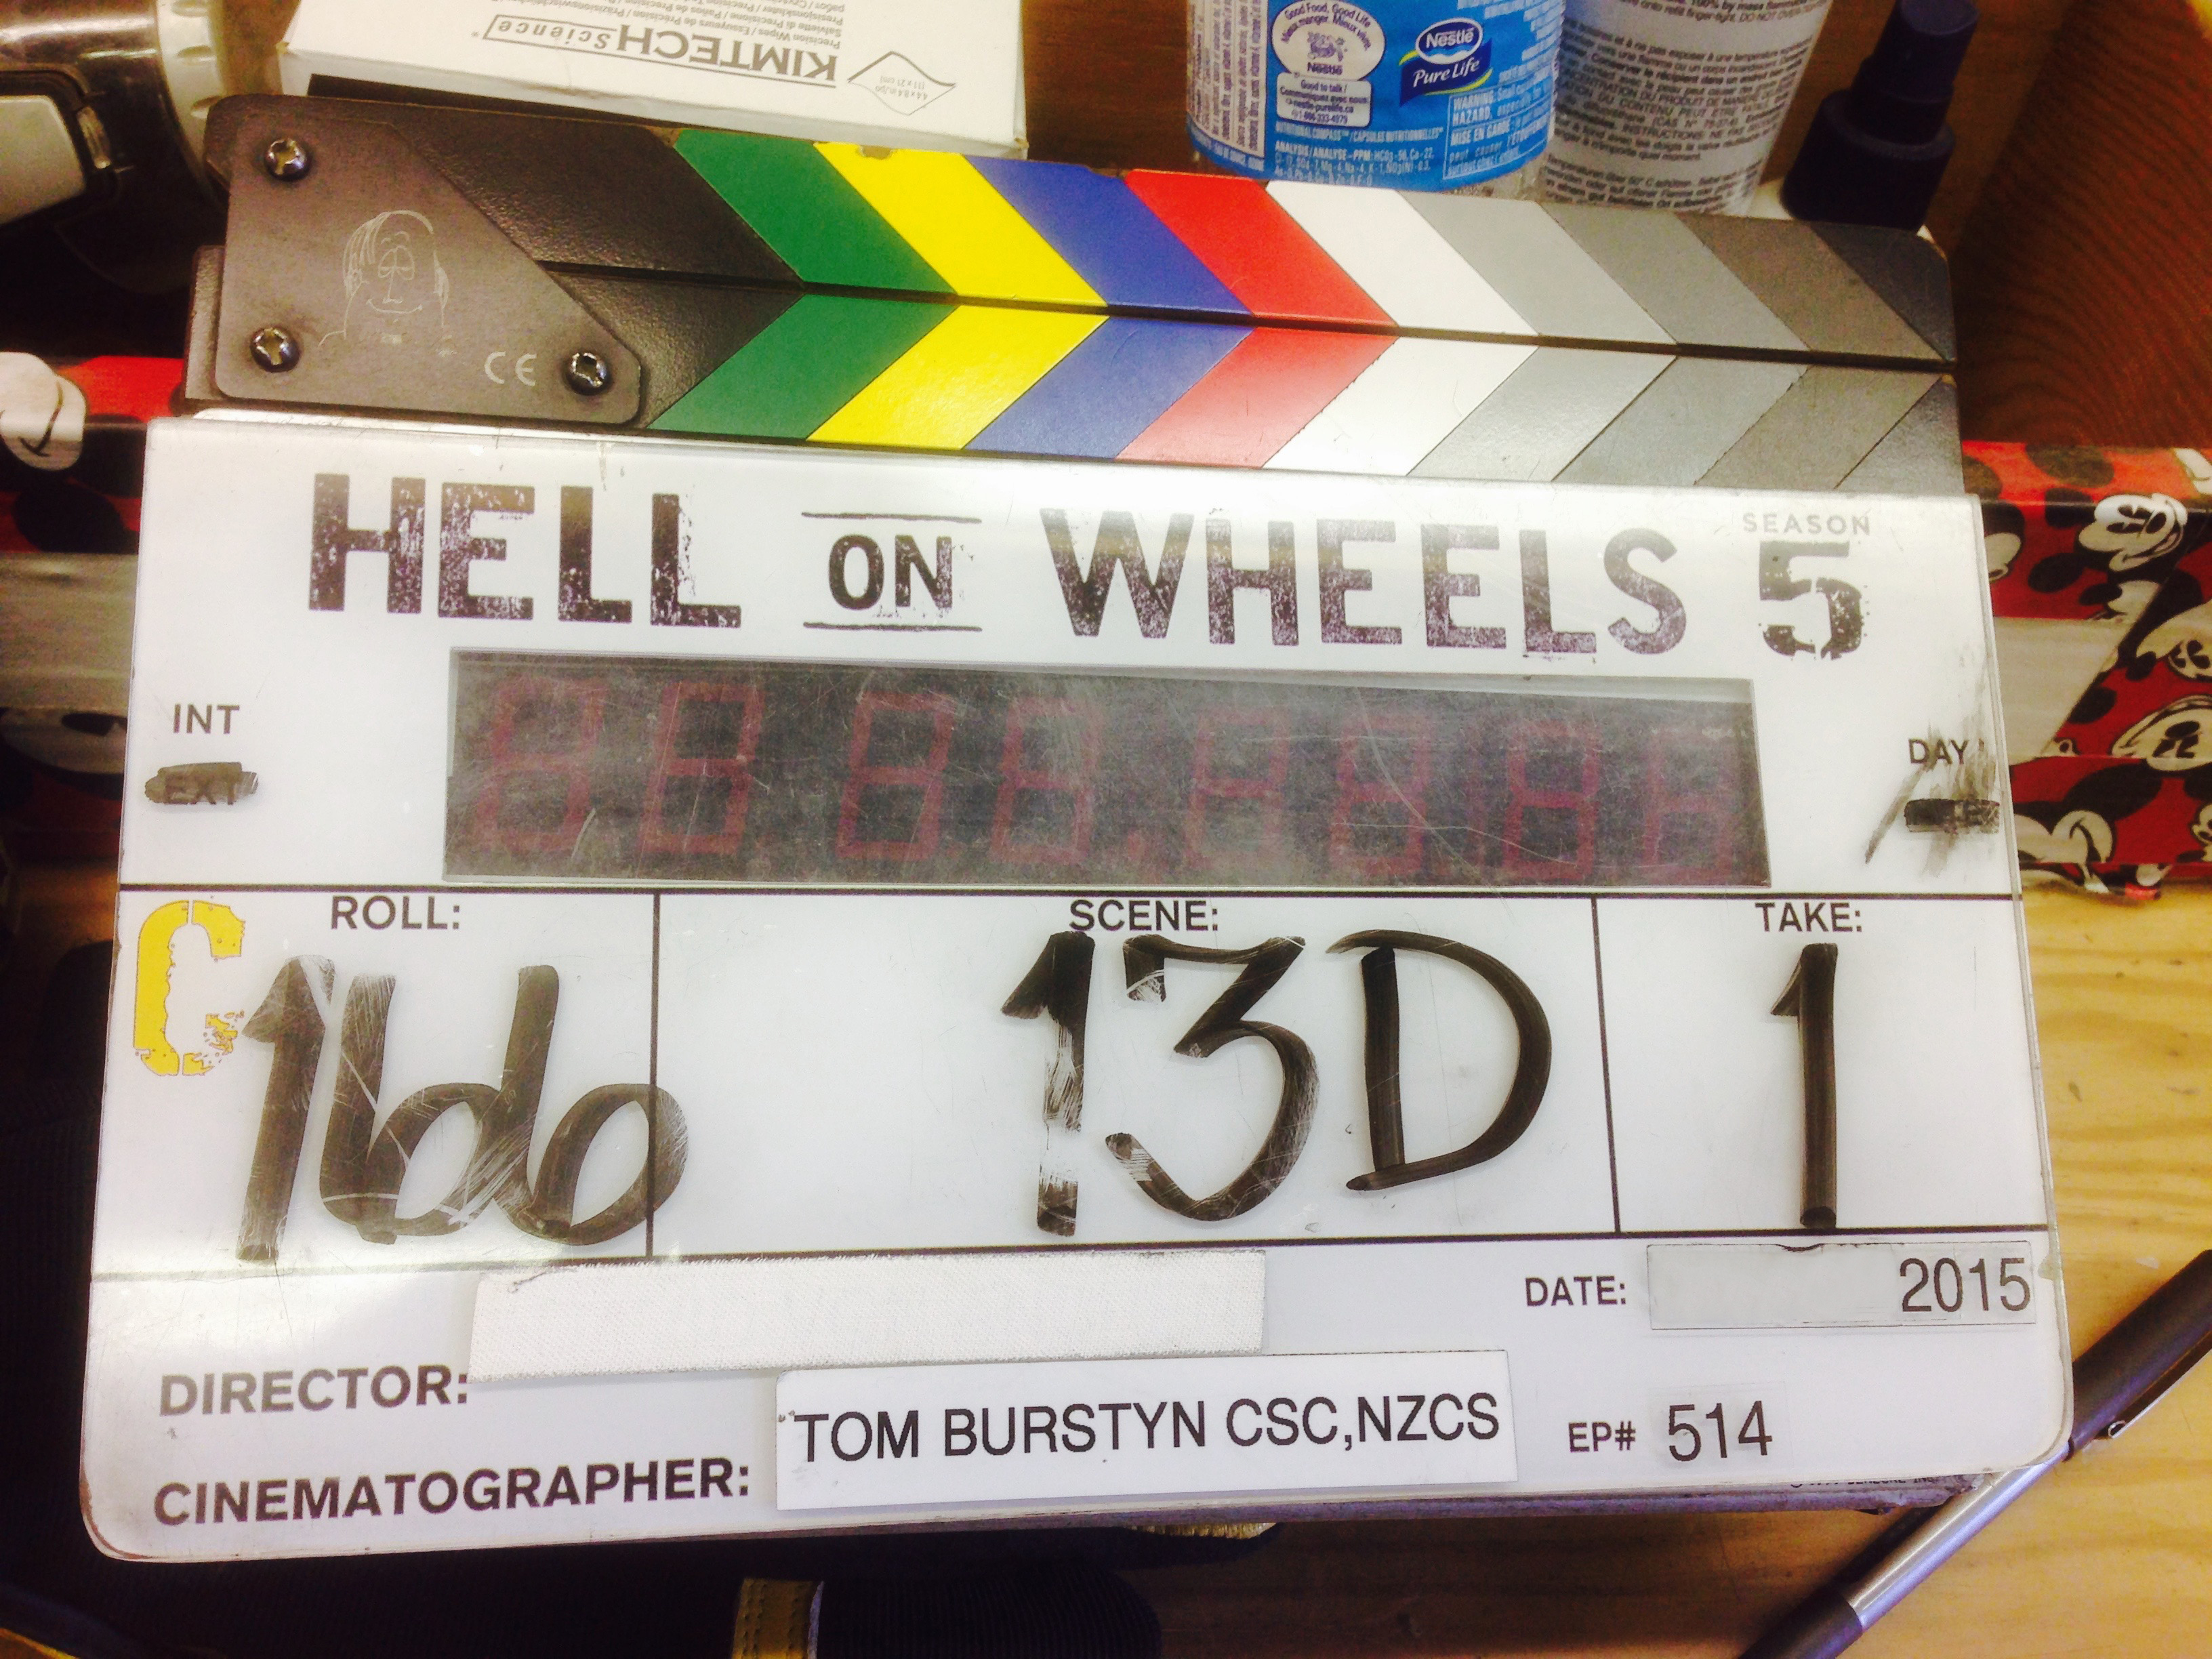 Slate from working in the Camera Department for Hell on Wheels Season 5 on AMC.